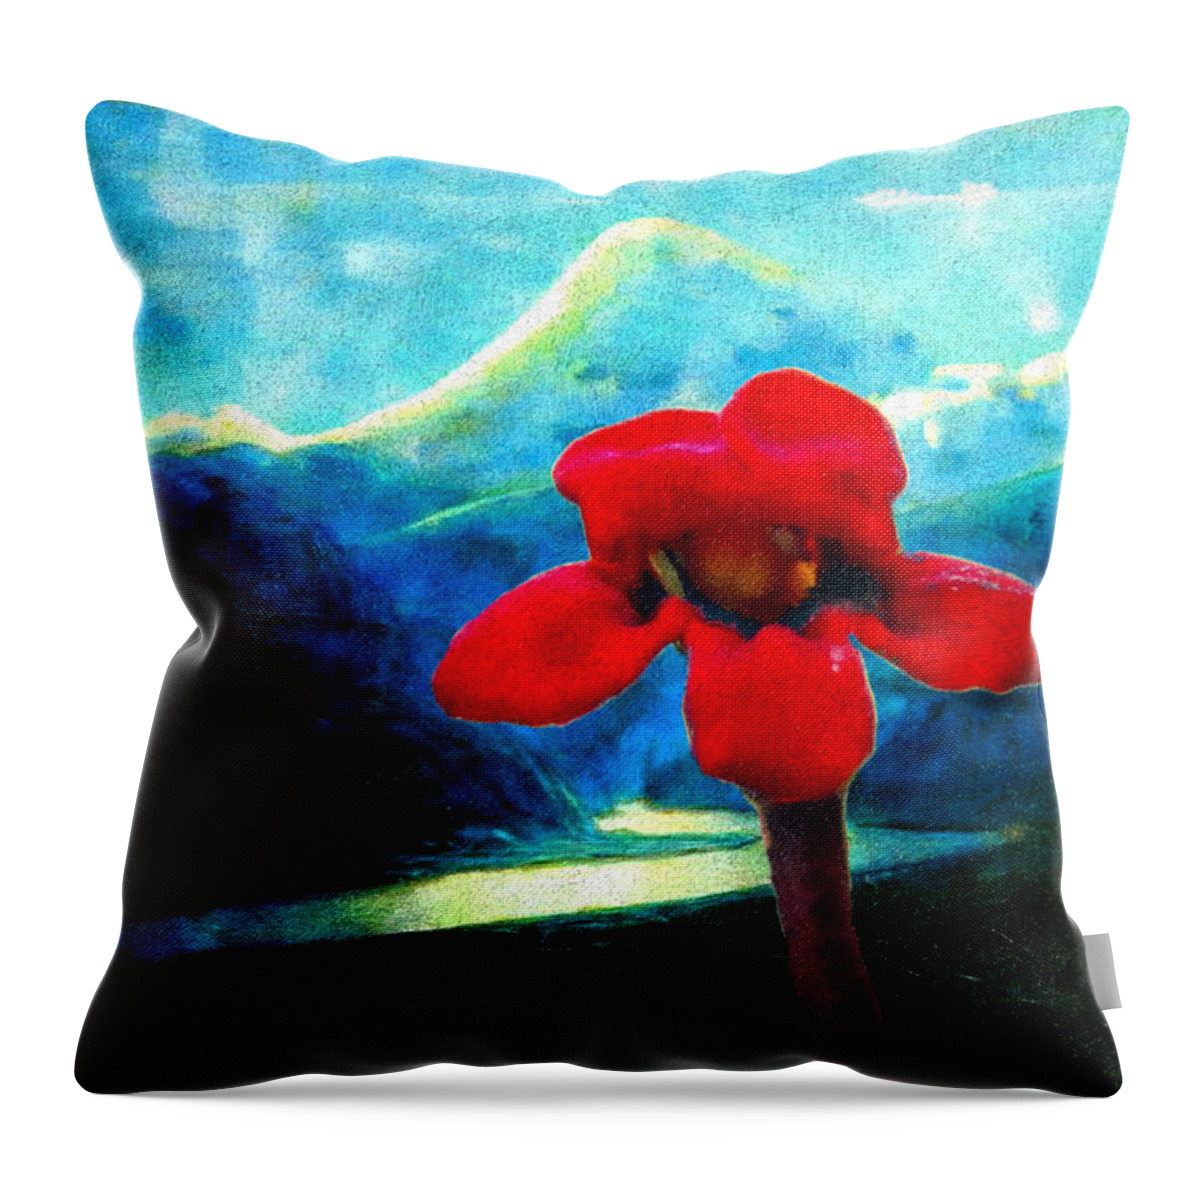 Red Flower Throw Pillow featuring the photograph Caucasus Love Flower II by Anastasia Savage Ealy